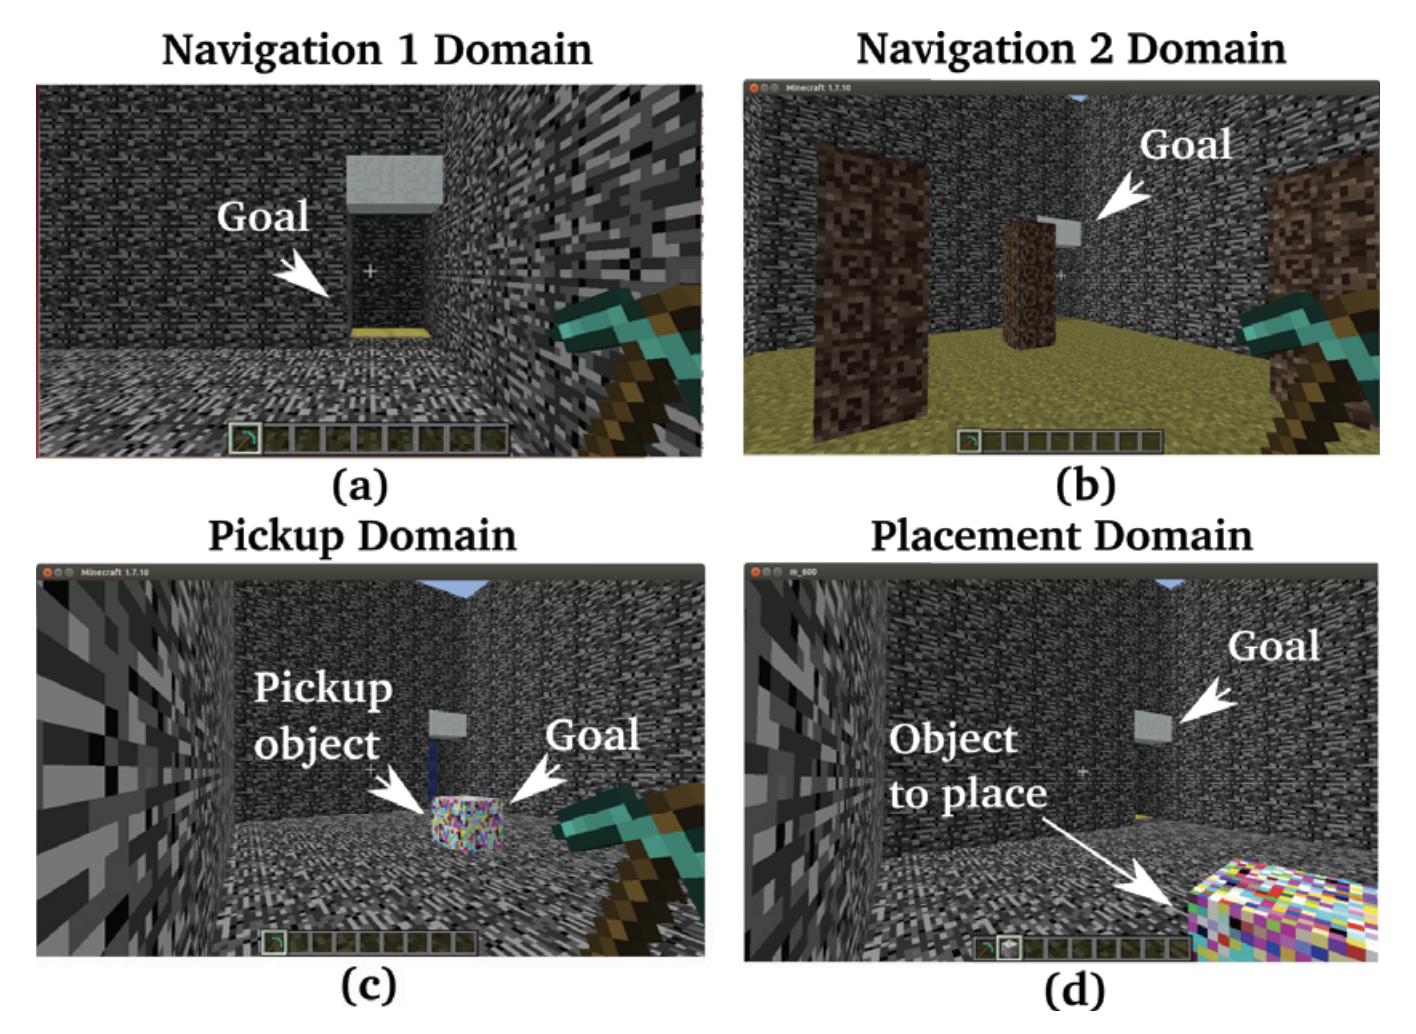 A Deep Hierarchical Approach to Lifelong Learning in Minecraft